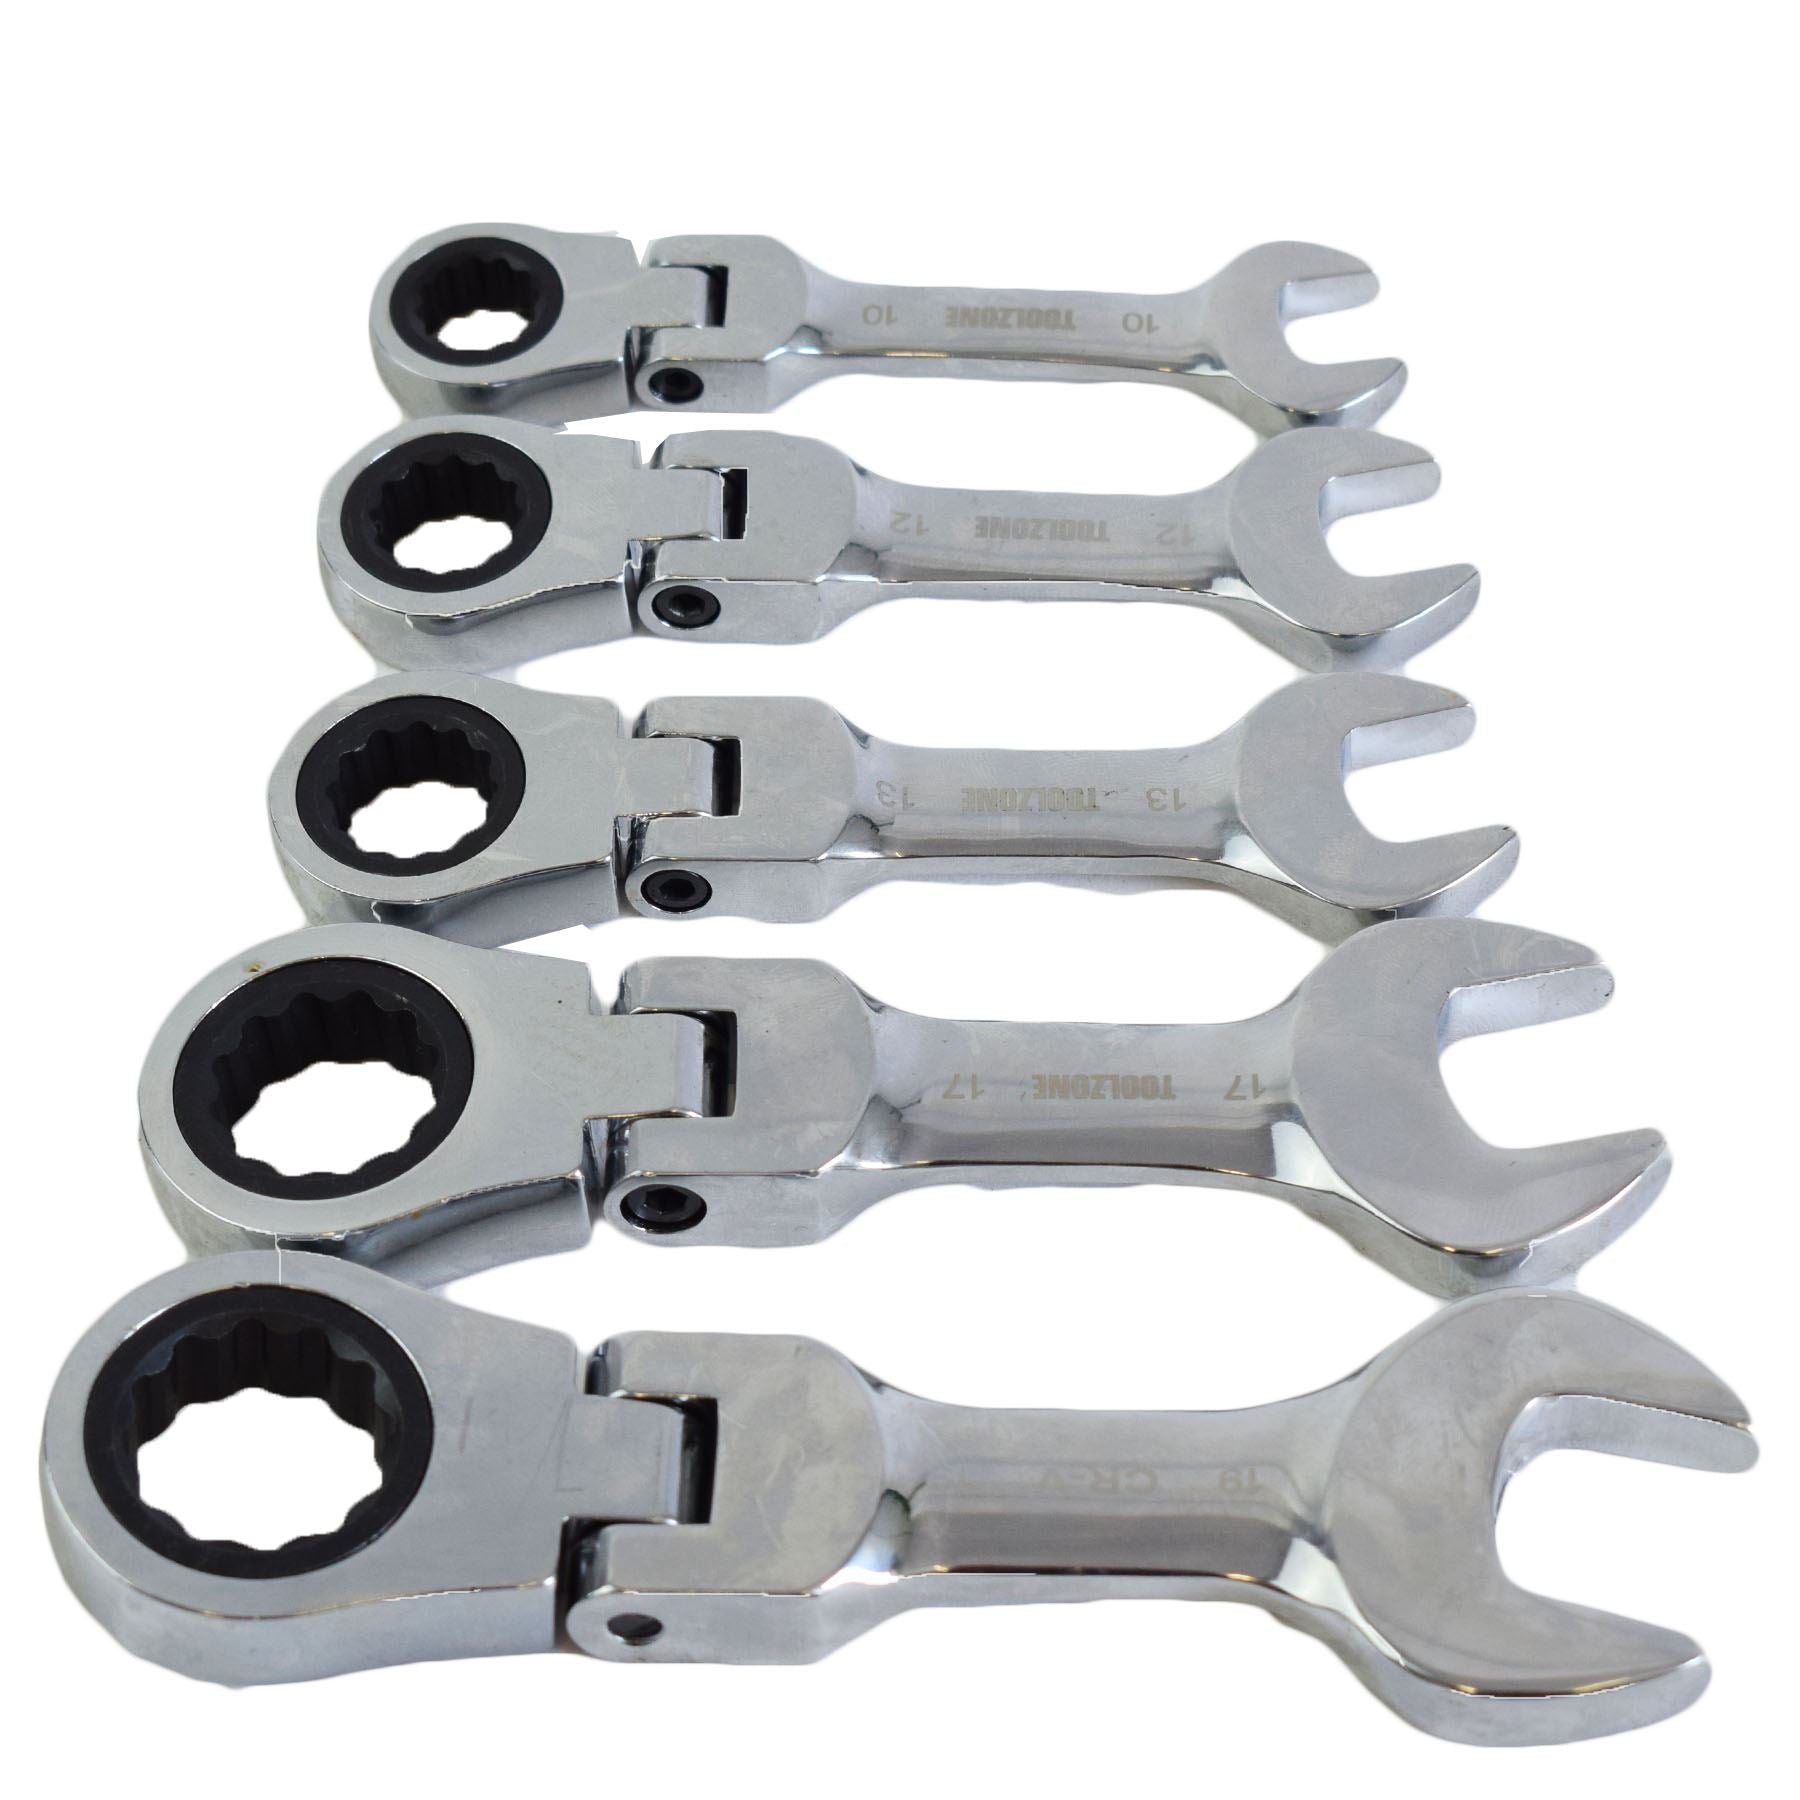 5pc Flexi Stubby Ratchet Spanner 10-19mm Metric Wrench Geared 72 Teeth CRV